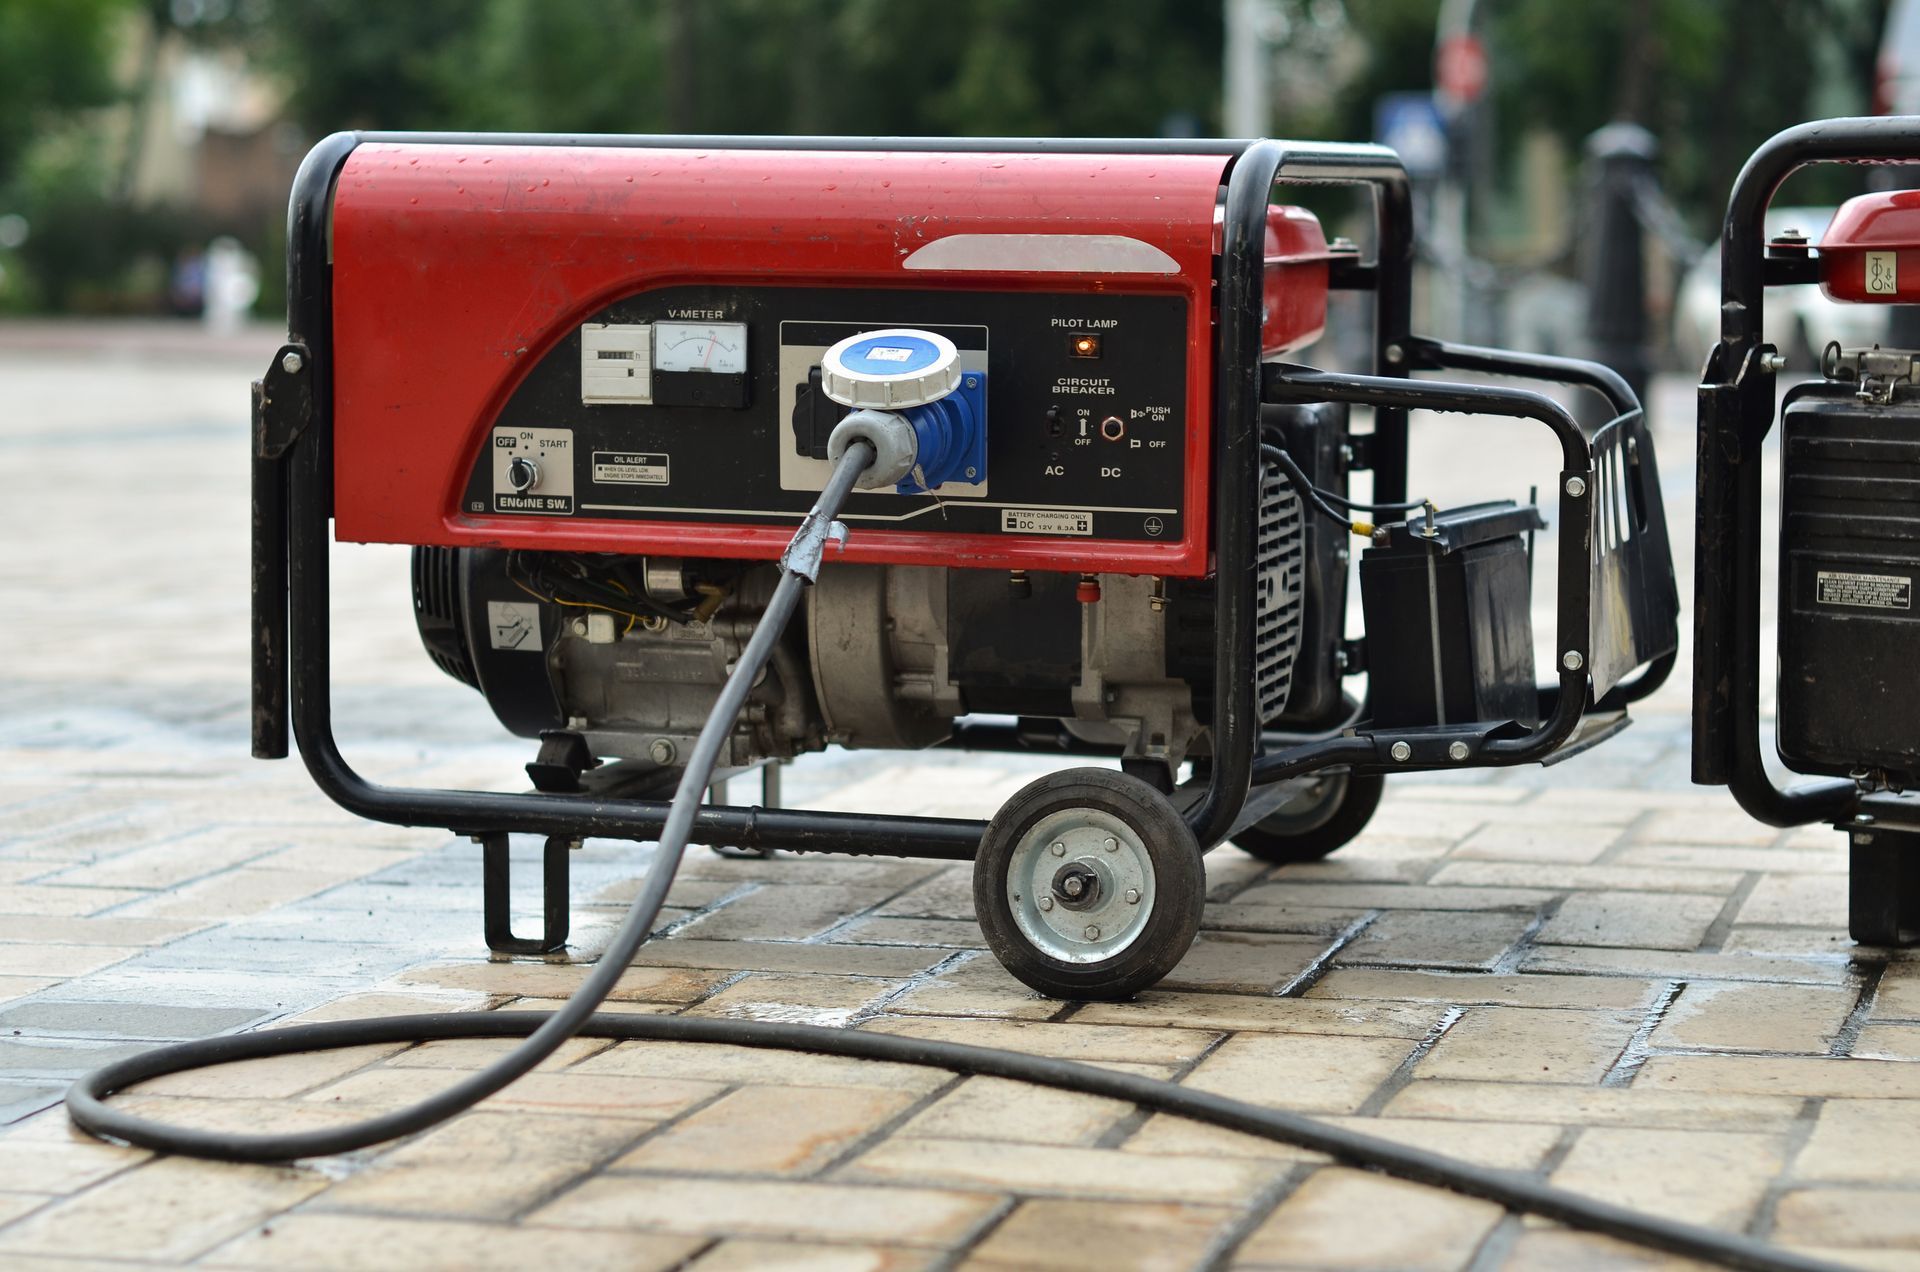 Electric generator providing power on a city street during an outage